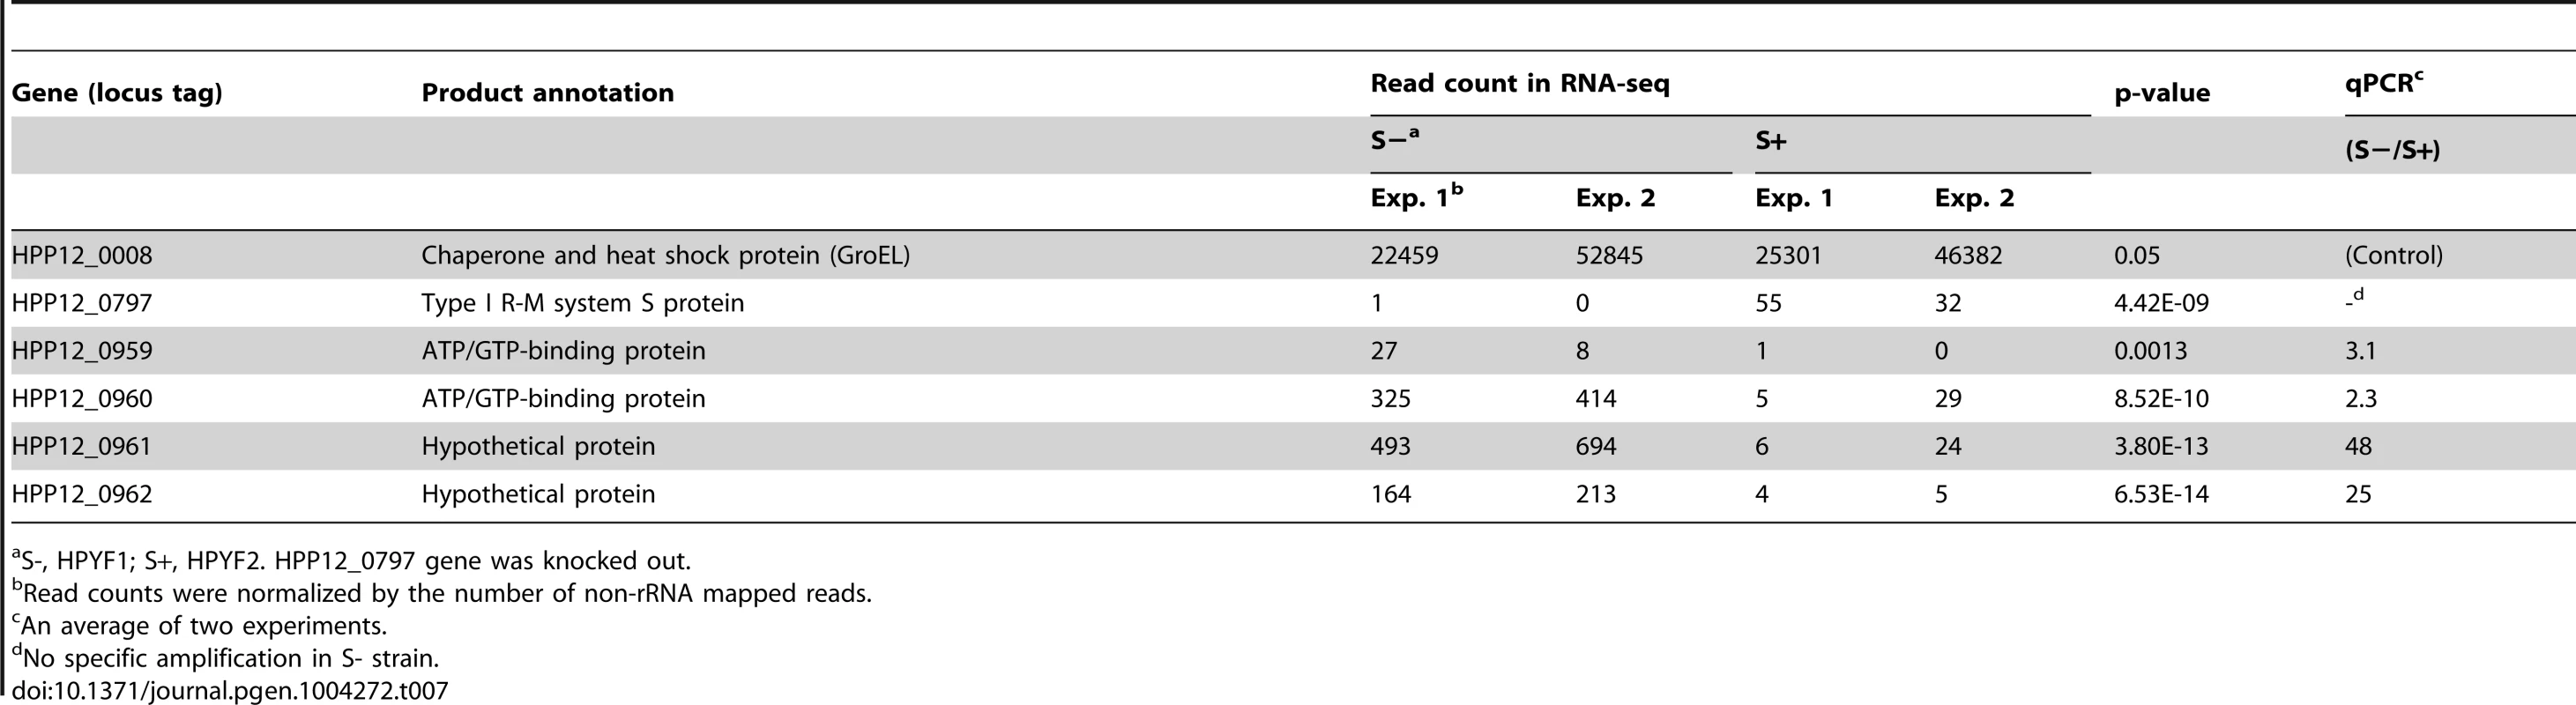 Transcriptome affected by knockout of a Type I specificity gene.